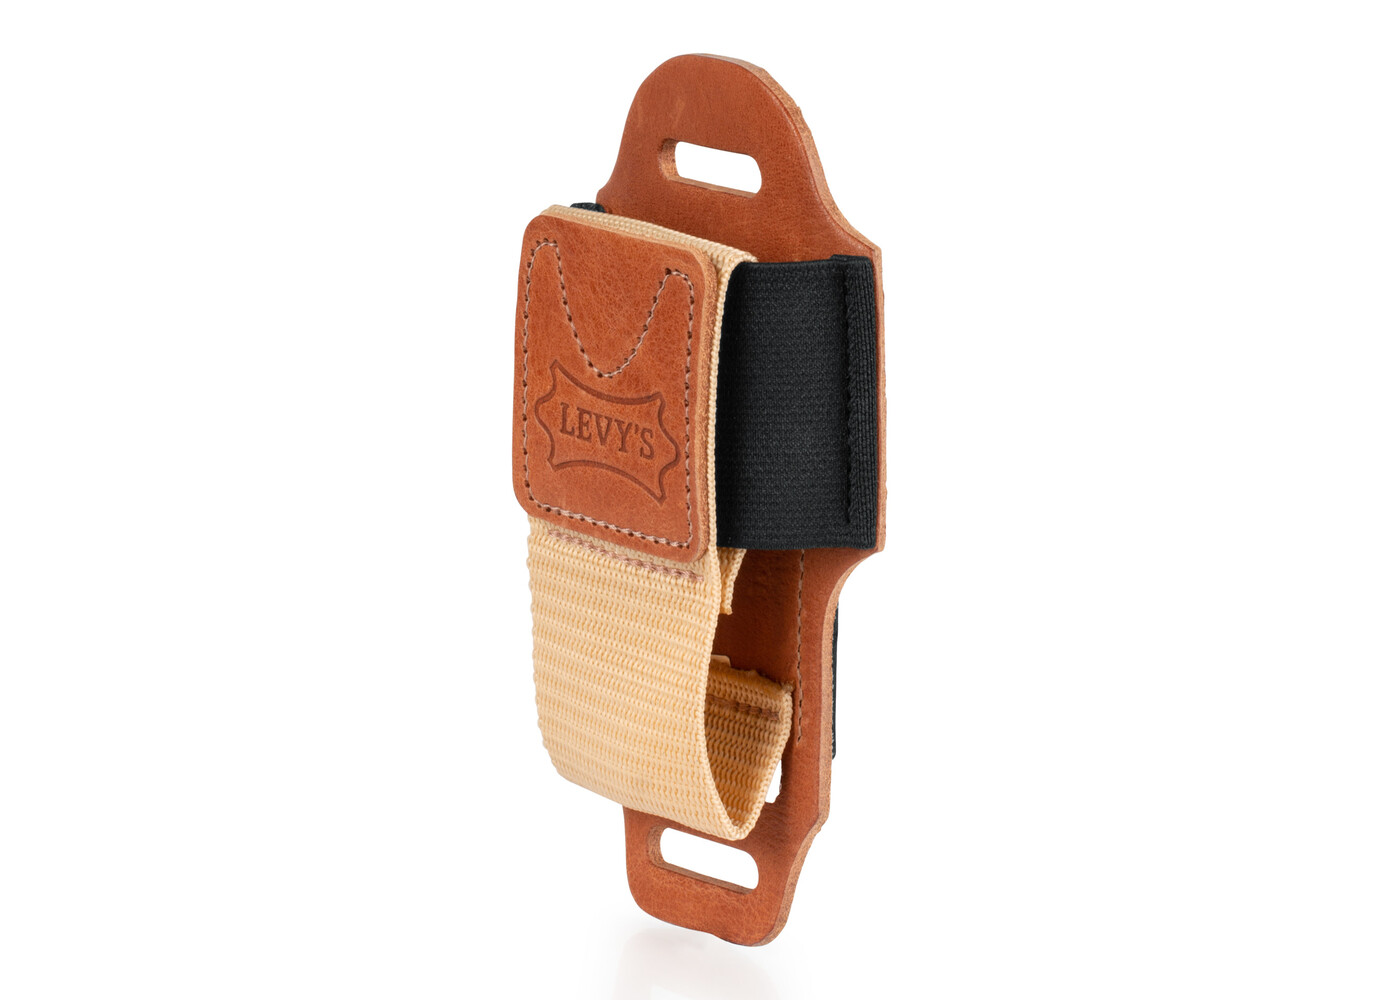 Levy's Levy's Wireless Transmitter Bodypack Holder-  Tan Leather